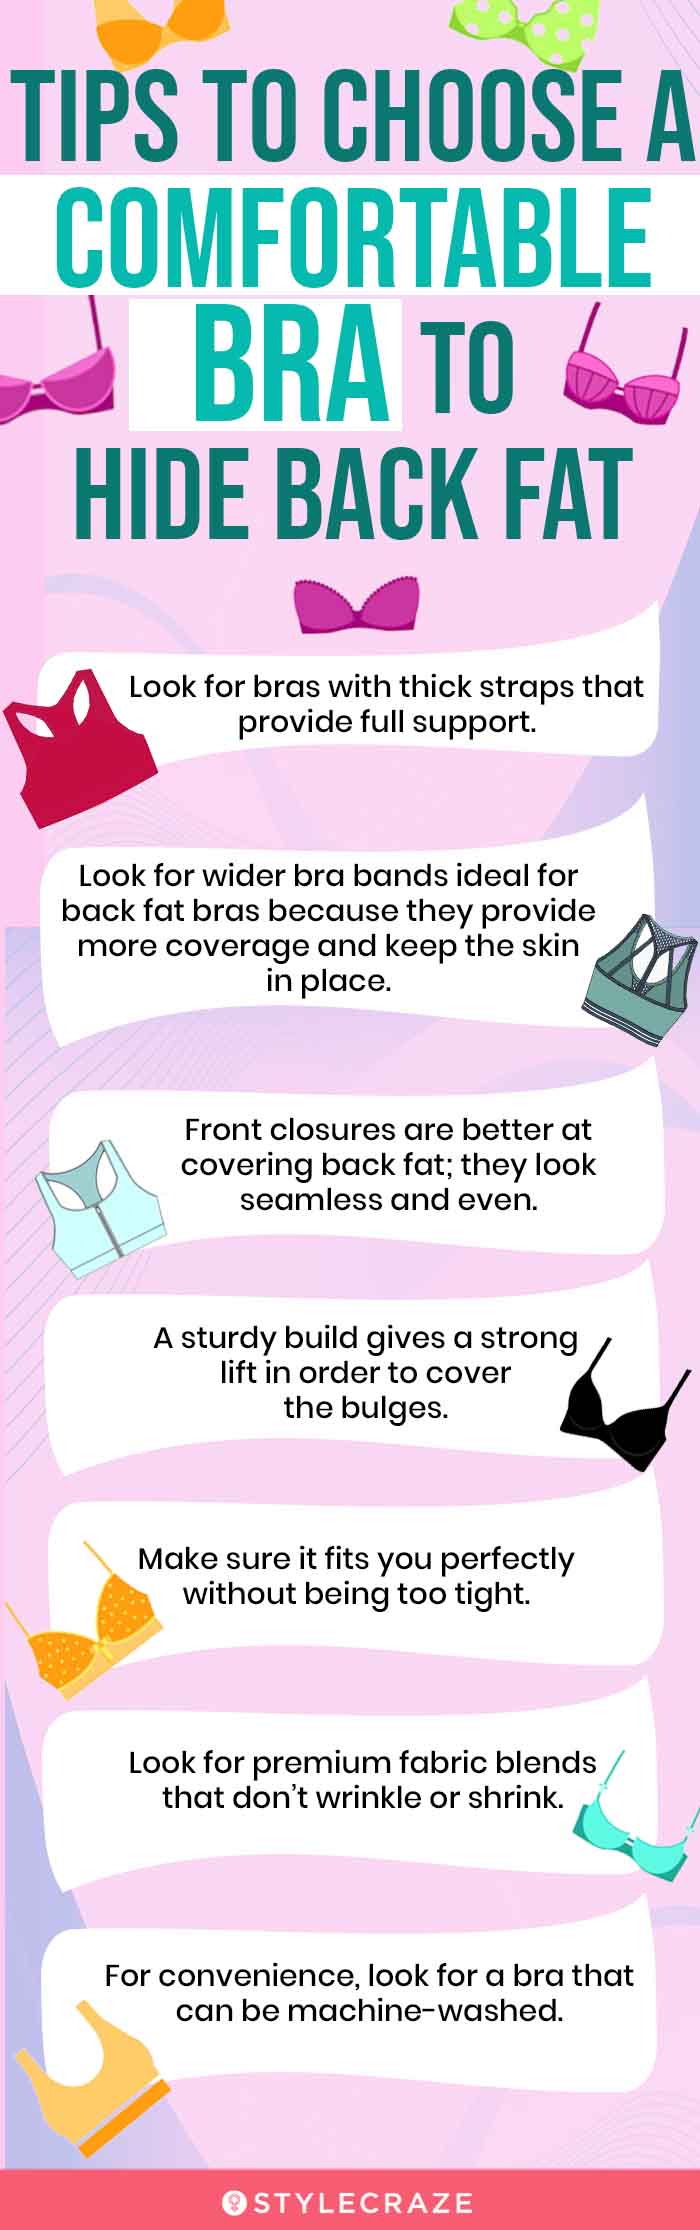 Tips To Choose A Comfortable Bra To Hide Back Fat